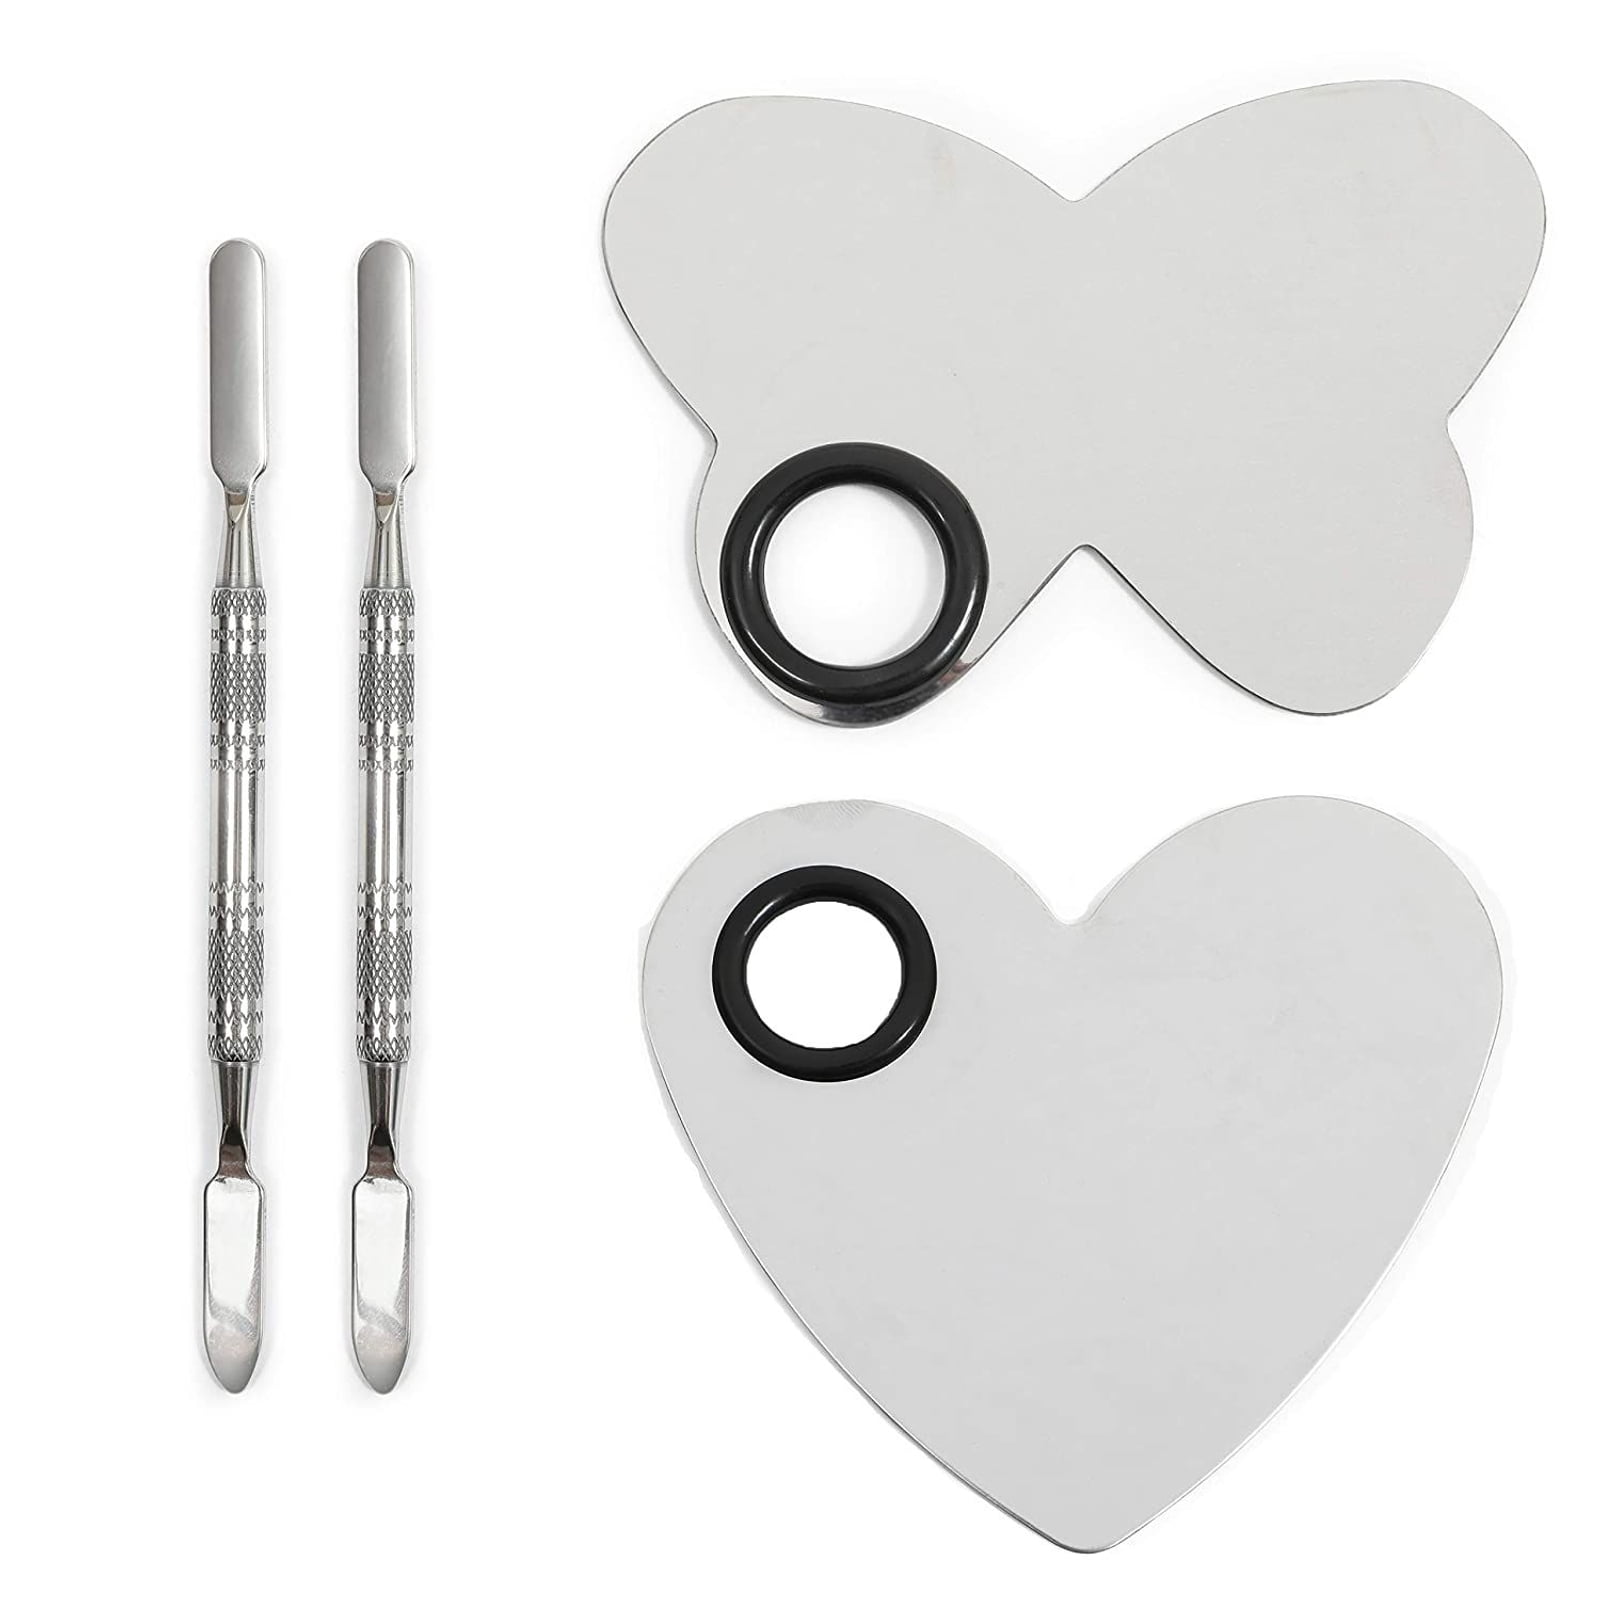 JAPCHET 8 PCS Mixing Makeup Palette, 3-Well Makeup Palette Mixer Tray,  Stainless Steel Cosmetic Palette with 8 PCS Spatula Tool, Multipurpose  Makeup